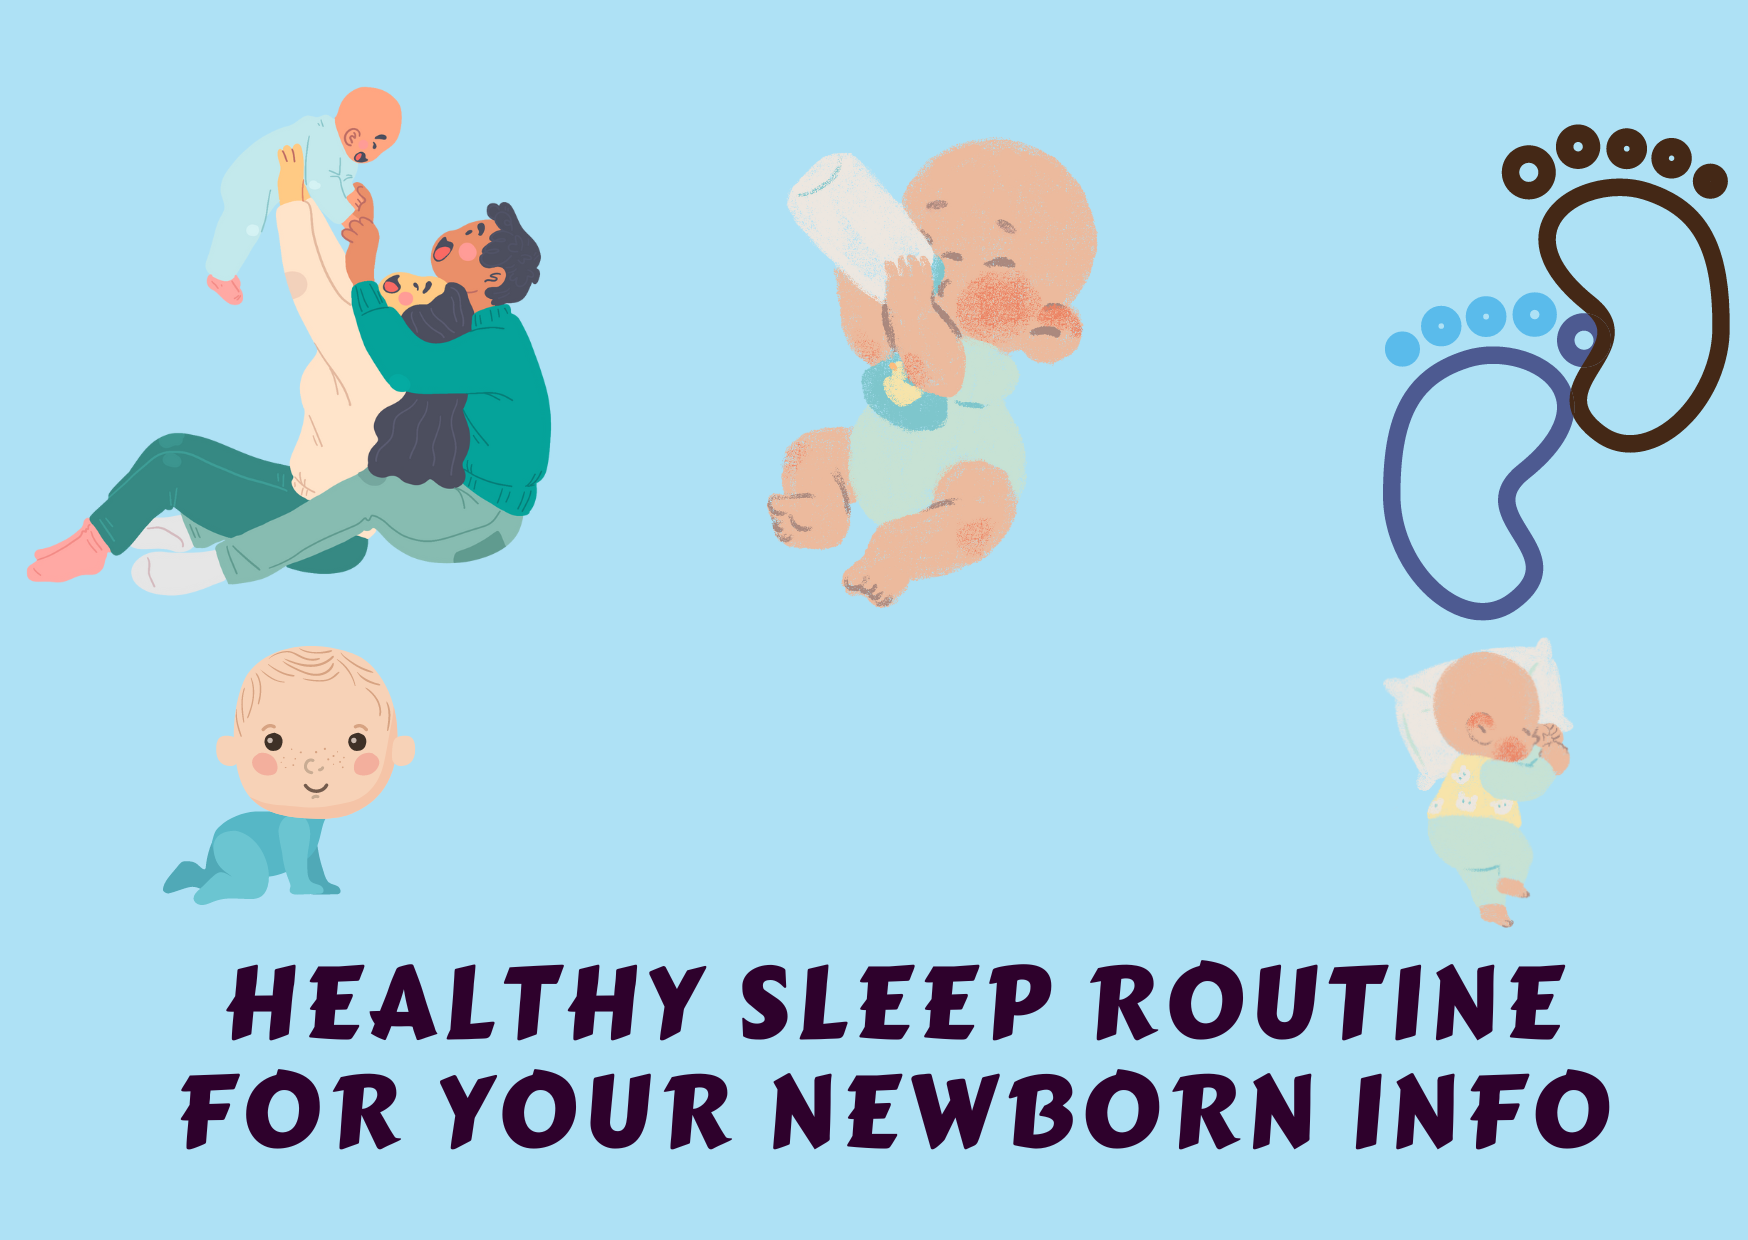 5 Tips for Establishing a Healthy Sleep Routine for Your Newborn